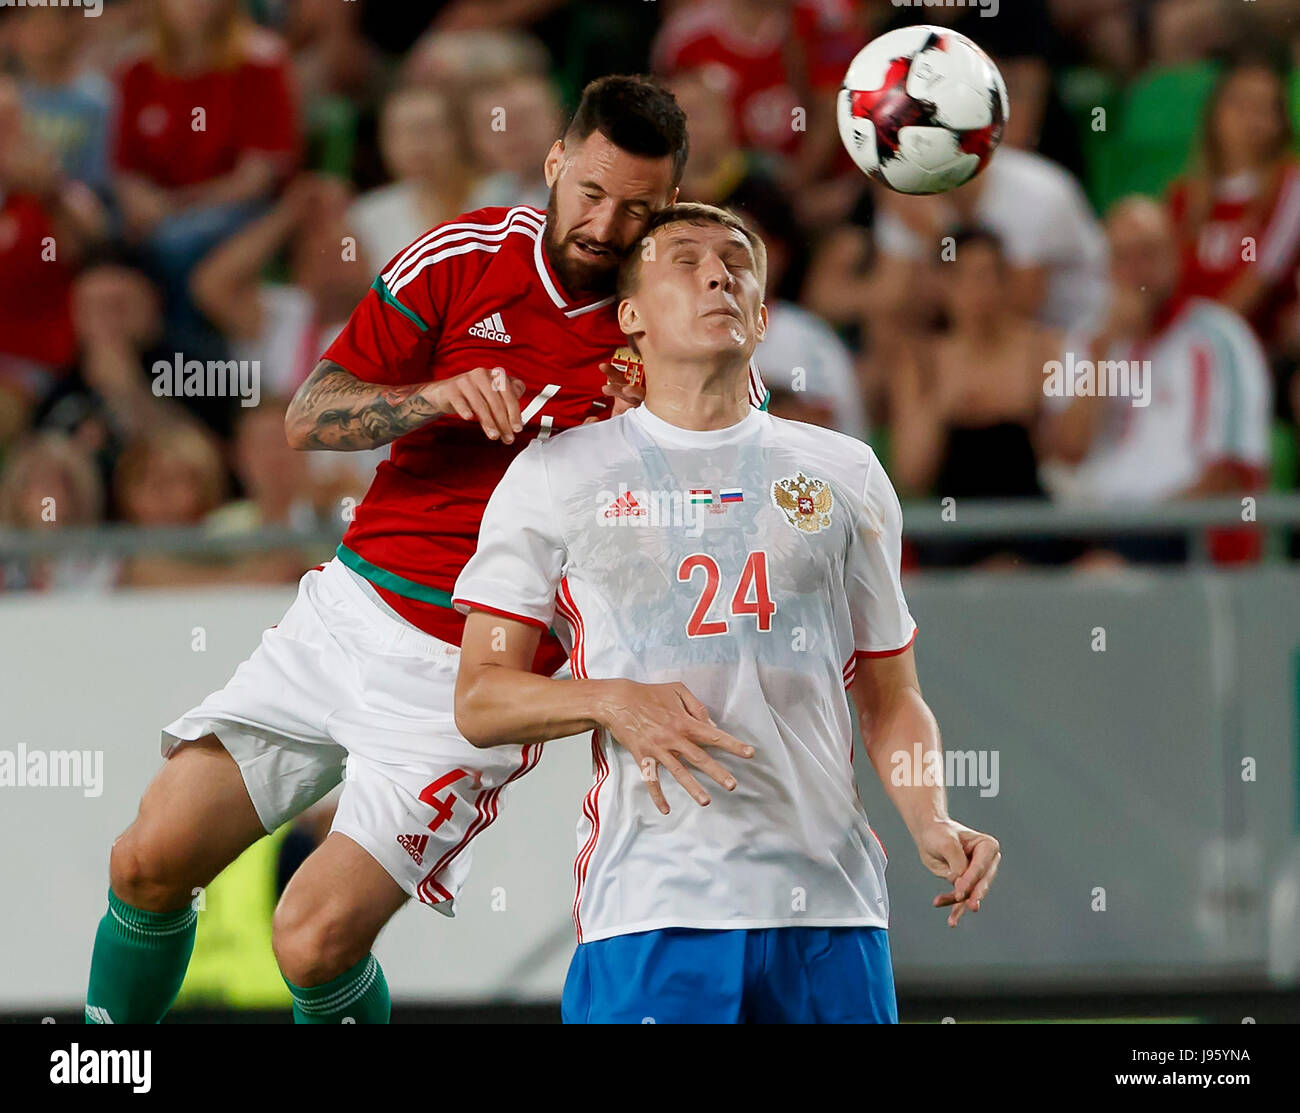 Budapest, Hungary. 05th June, 2017. BUDAPEST, HUNGARY - JUNE 5: Tamas Kadar #4 of Hungary competes for the ball in the air with Aleksandr Bukharov #24 of Russia during the International Friendly match between Hungary and Russia at Groupama Arena on June 5, 2017 in Budapest, Hungary. Credit: Laszlo Szirtesi/Alamy Live News Stock Photo